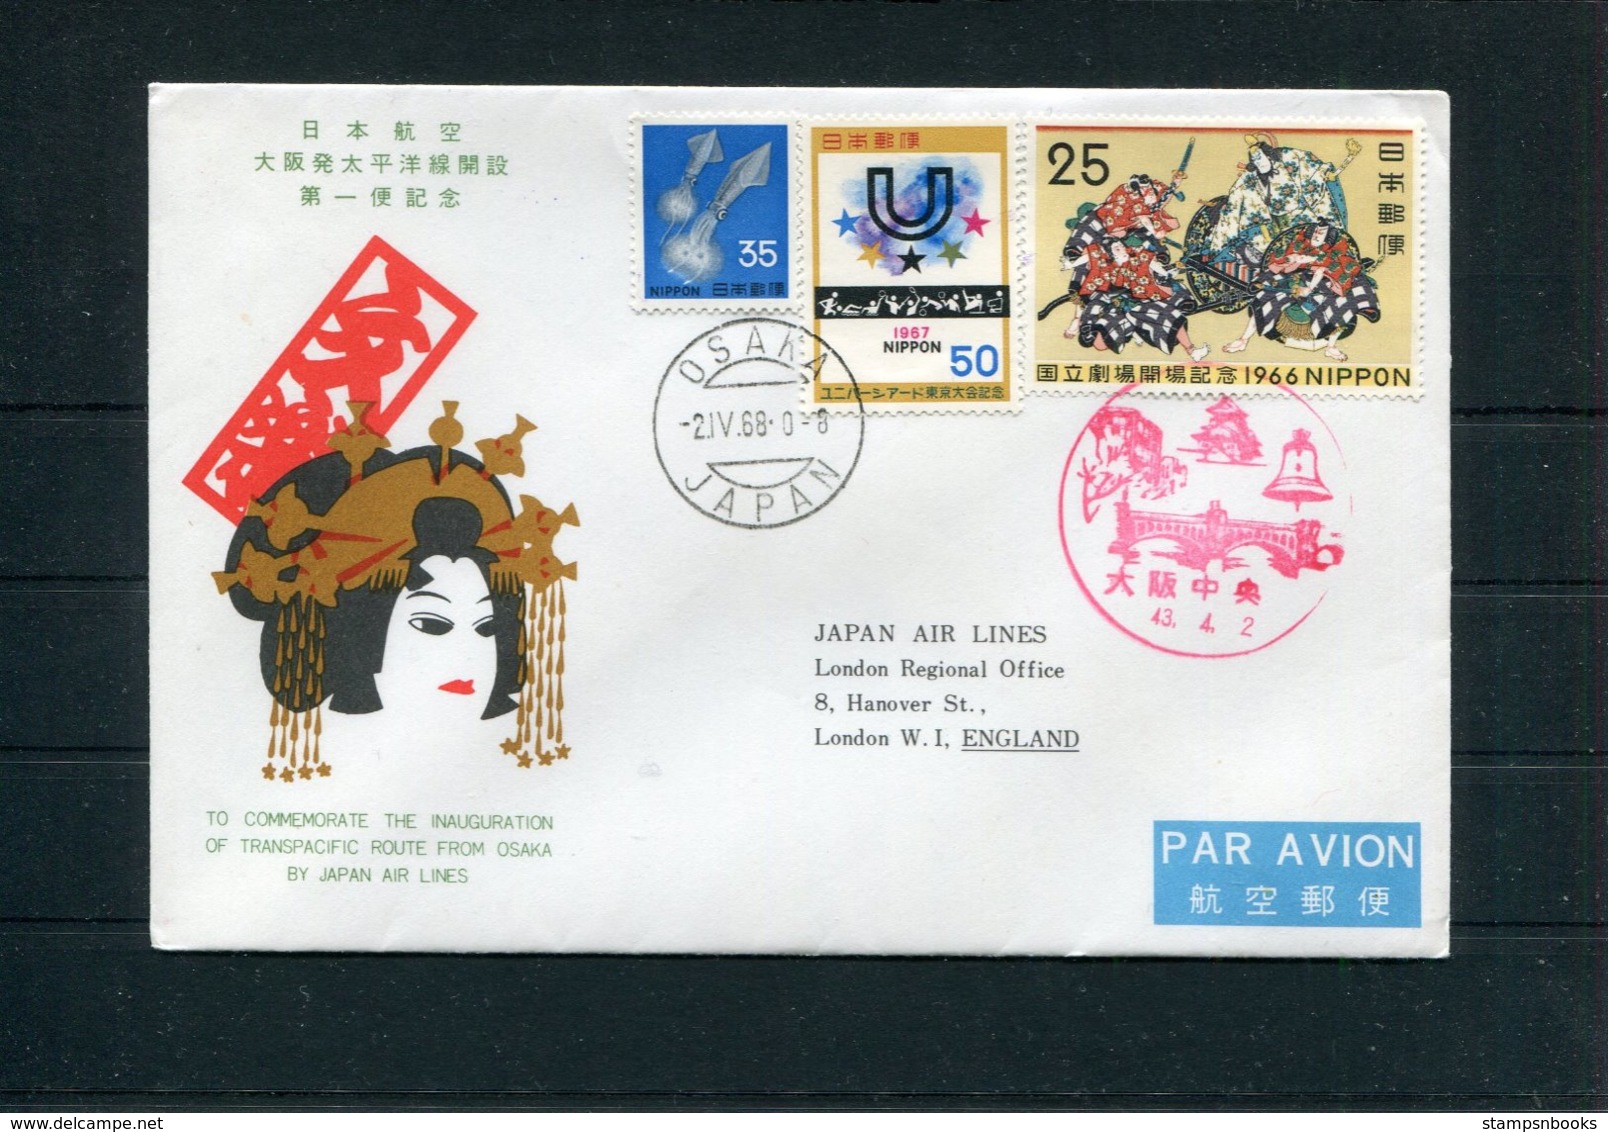 1968 Japan Air Lines JAL First Flight Cover Osaka - London England - Luftpost